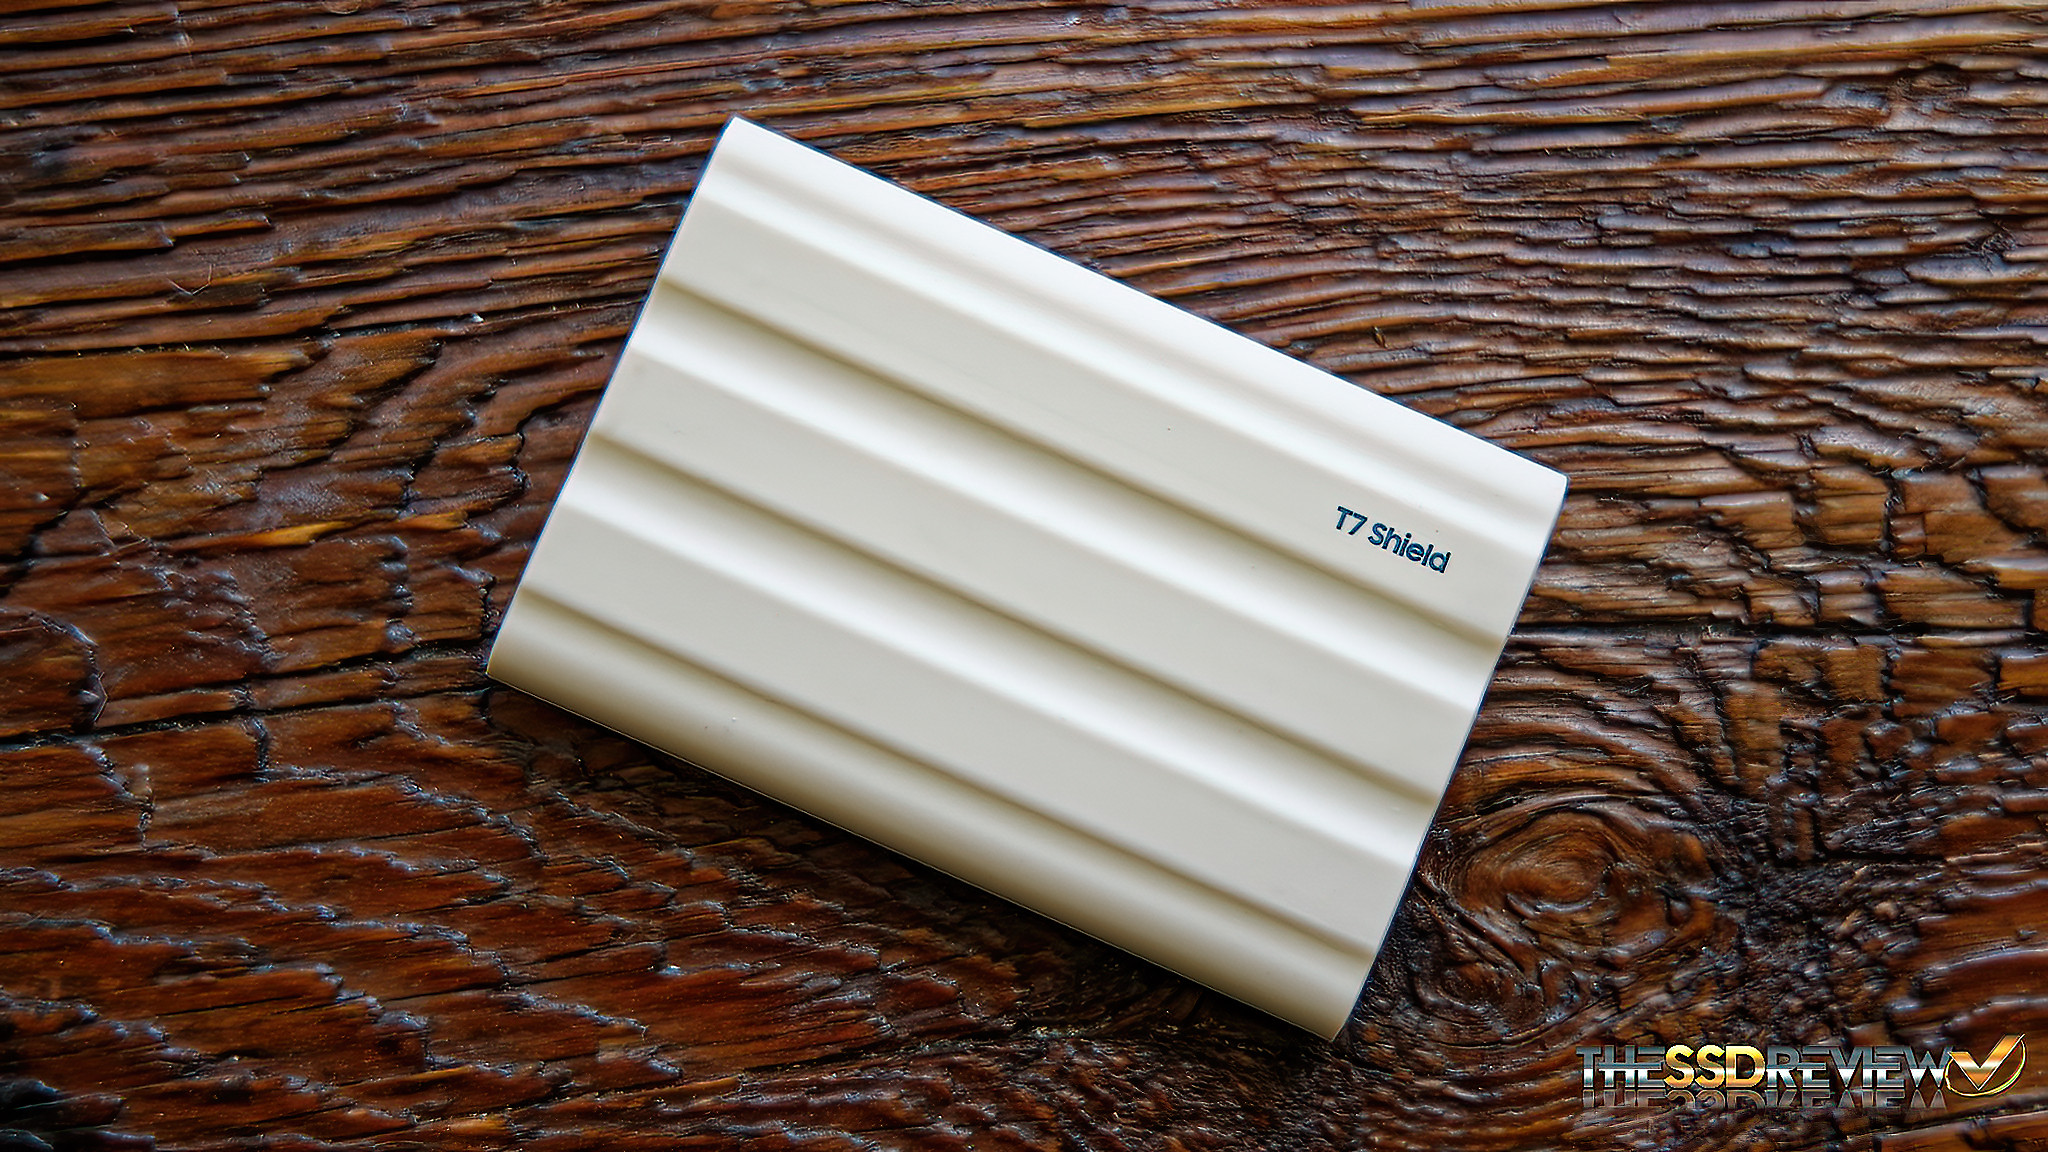 Samsung Portable SSD T7 Shield Review | The SSD Review